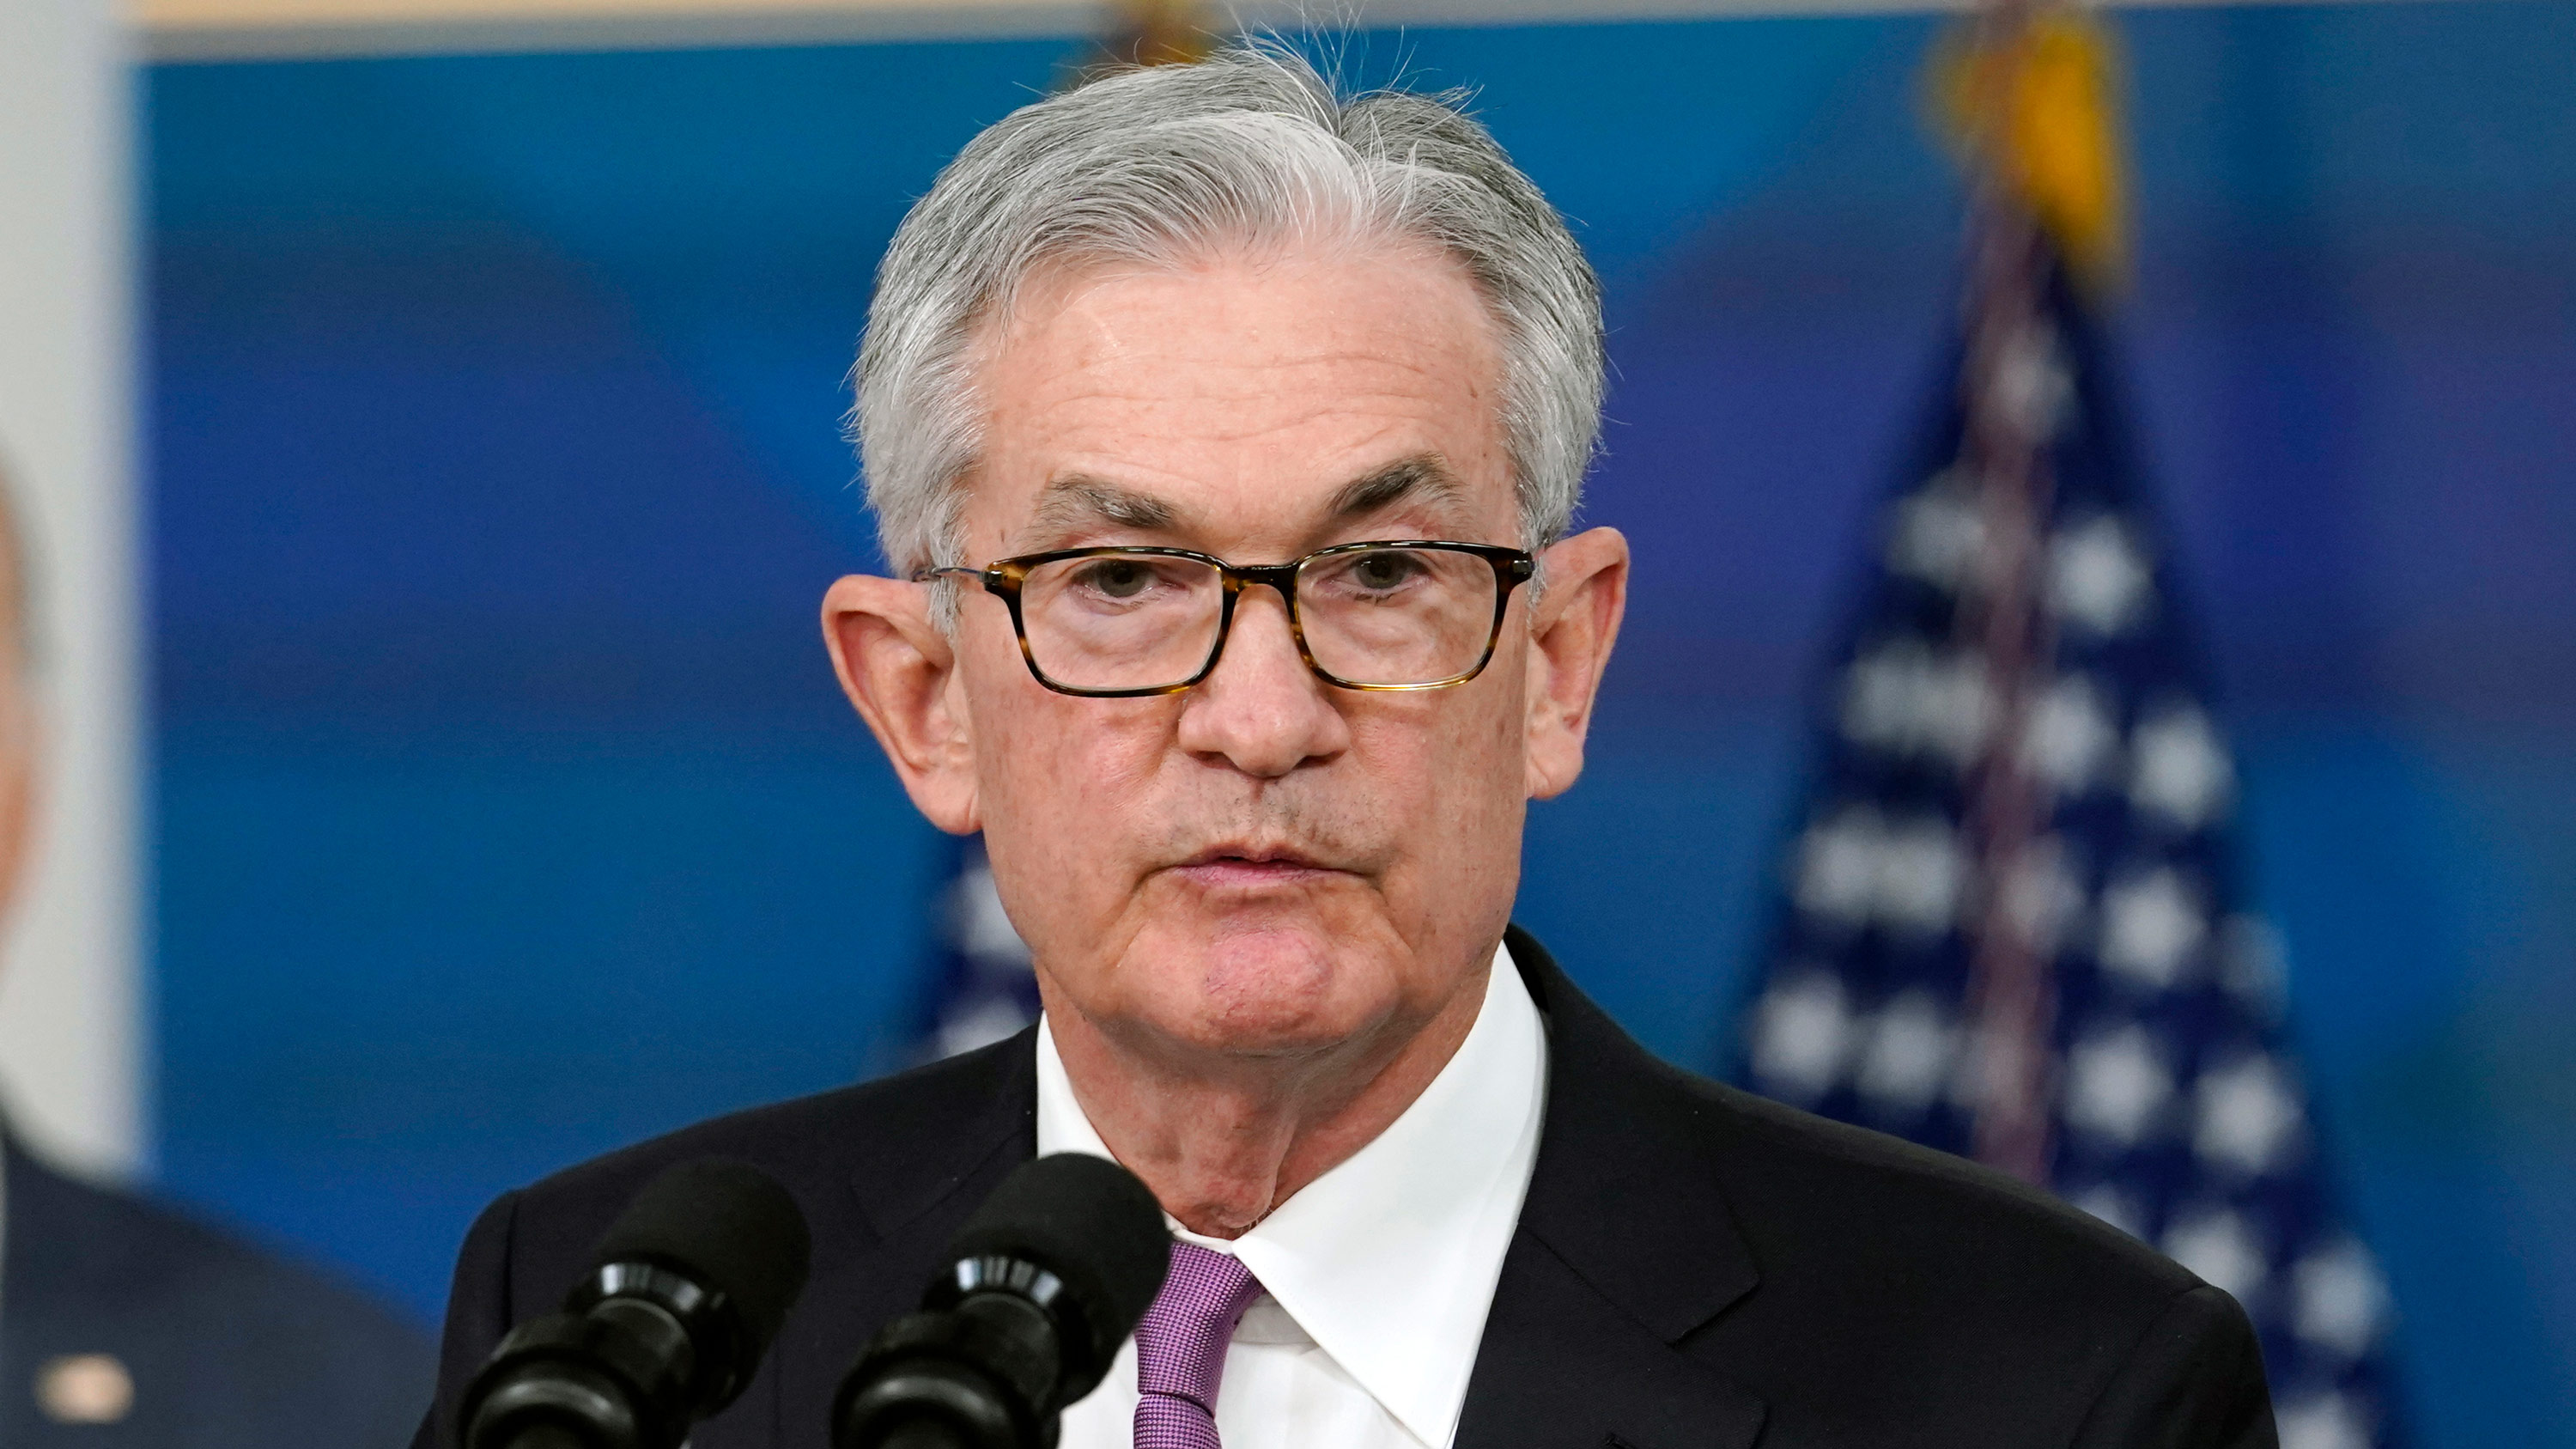 Federal Reserve Chairman Jerome Powell speaks at an event at the South Court Auditorium at the White House complex in Washington, DC, on Nov. 22.